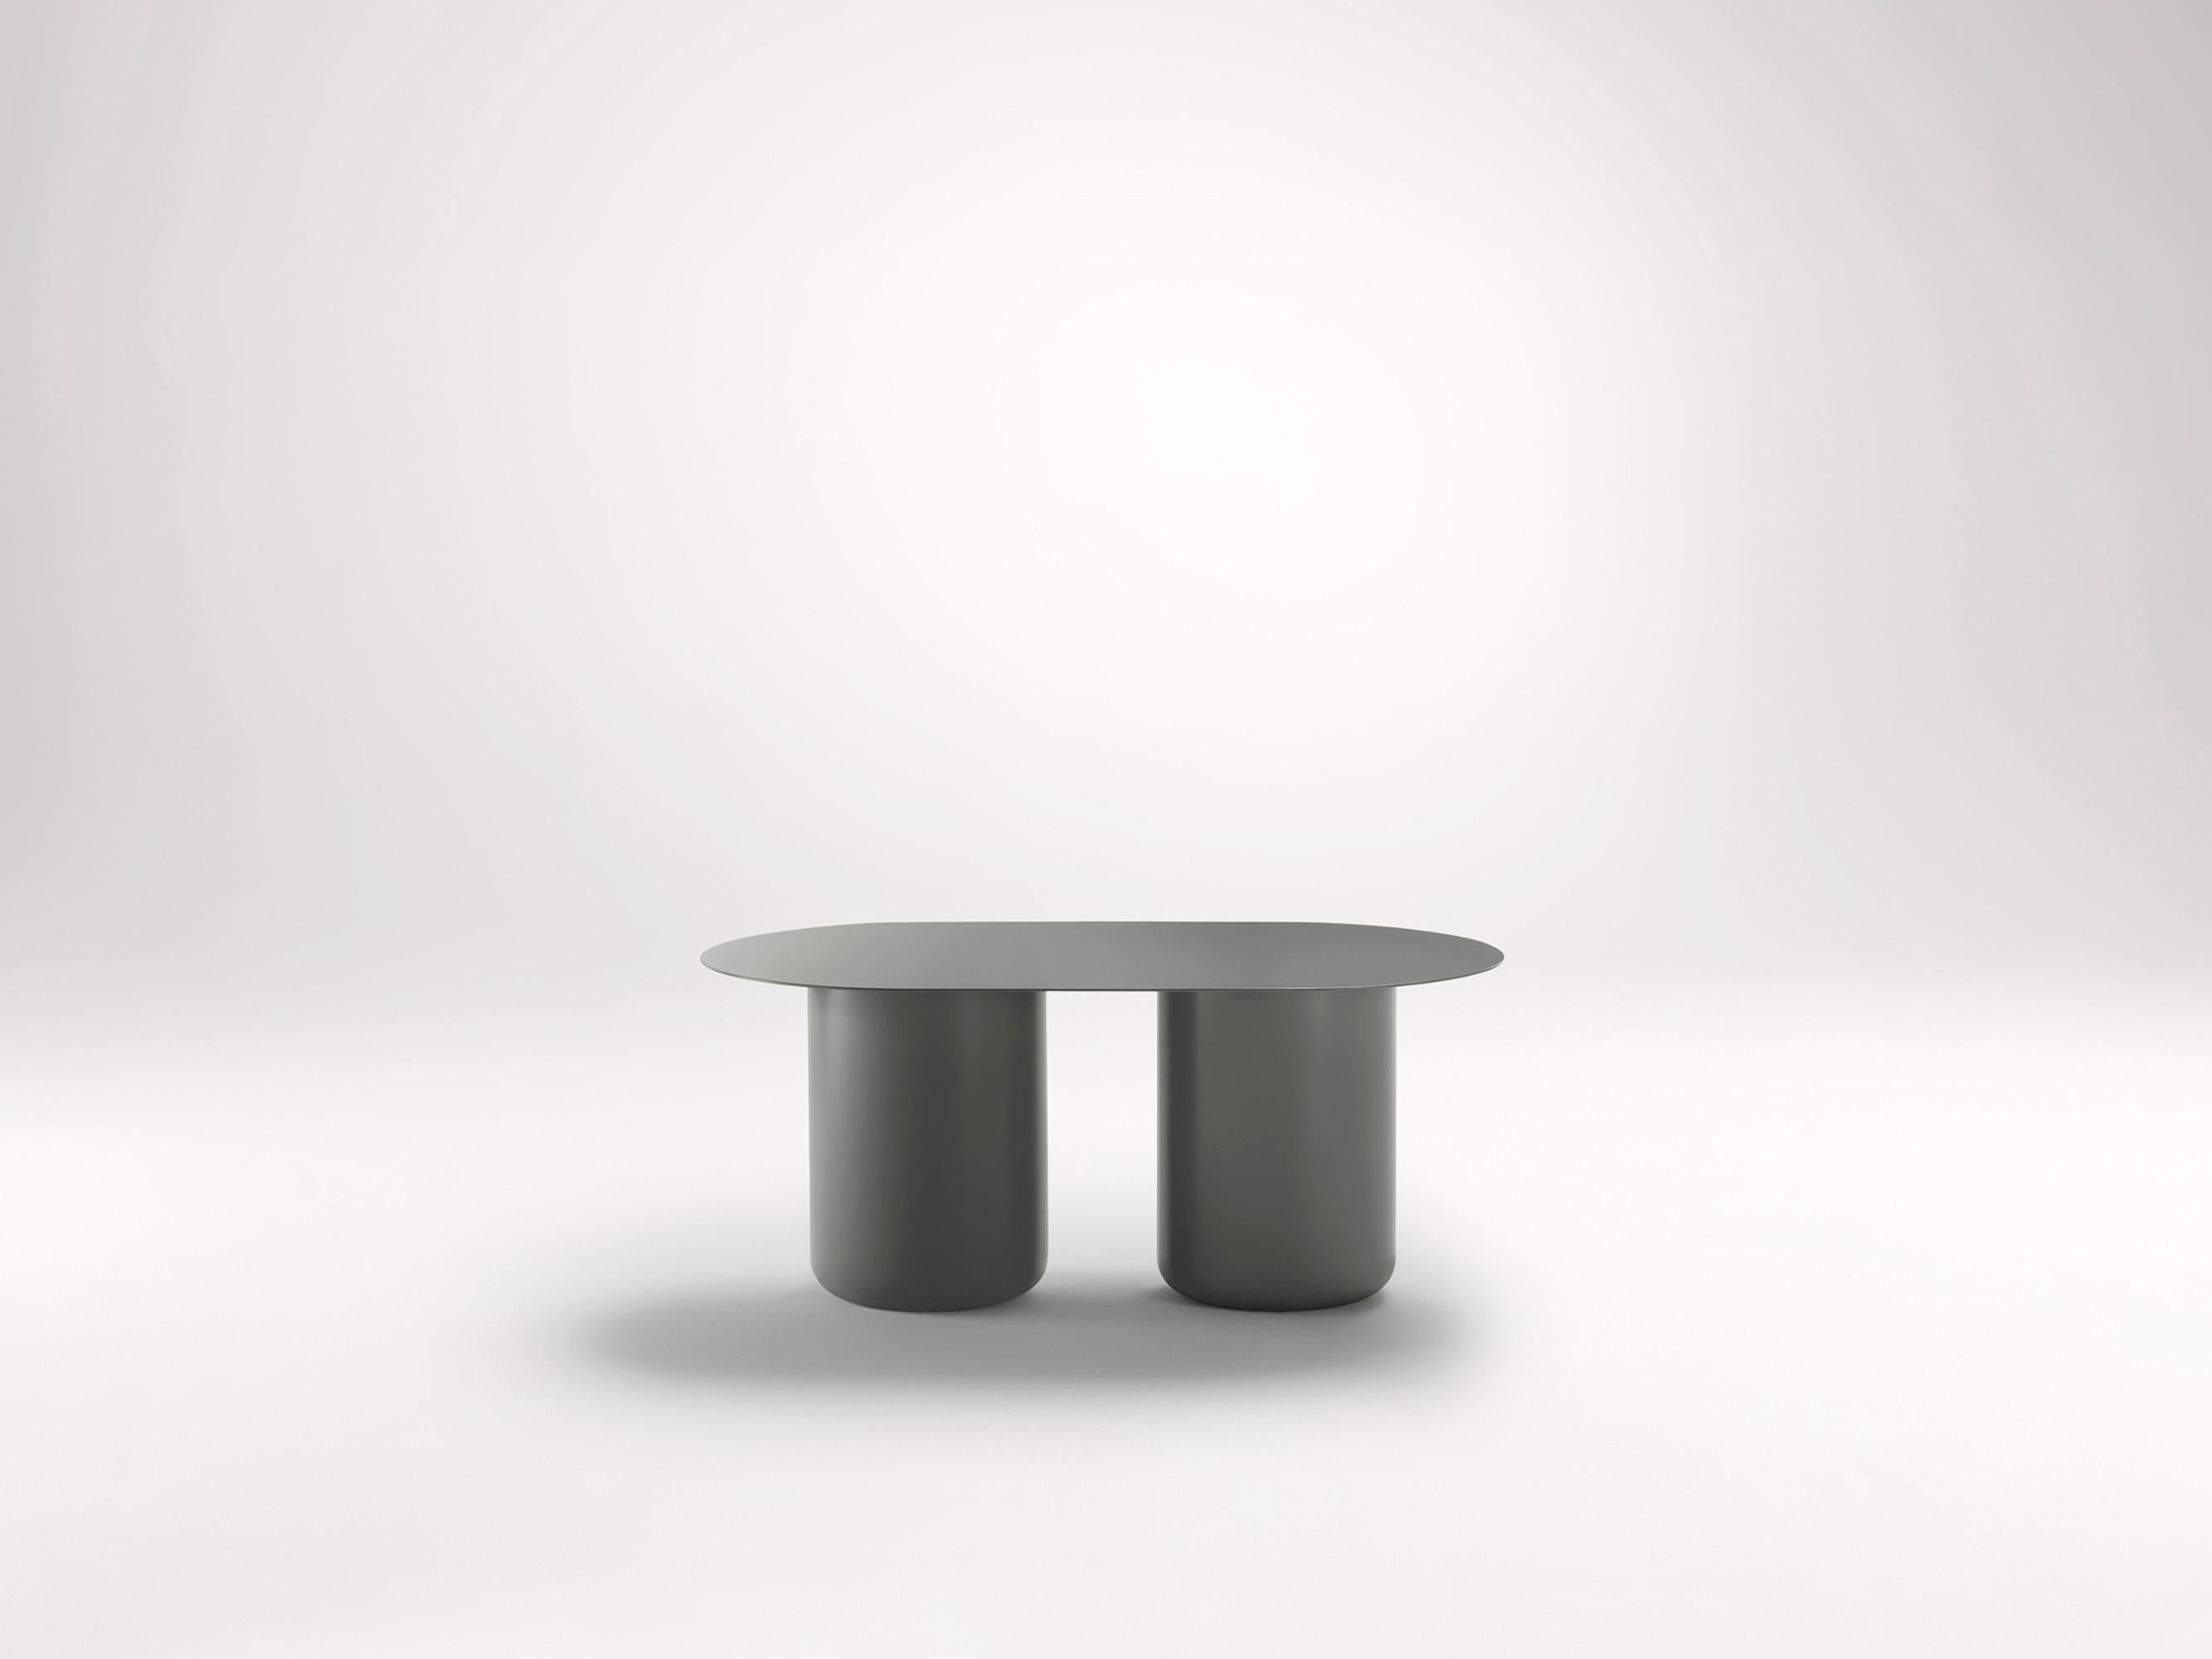 Woodland Grey Table 02 by Coco Flip
Dimensions: D 48 / 85 x H 32 / 36 / 40 / 42 cm
Materials: Mild steel, powder-coated with zinc undercoat. 
Weight: 20 kg

Coco Flip is a Melbourne based furniture and lighting design studio, run by us, Kate Stokes